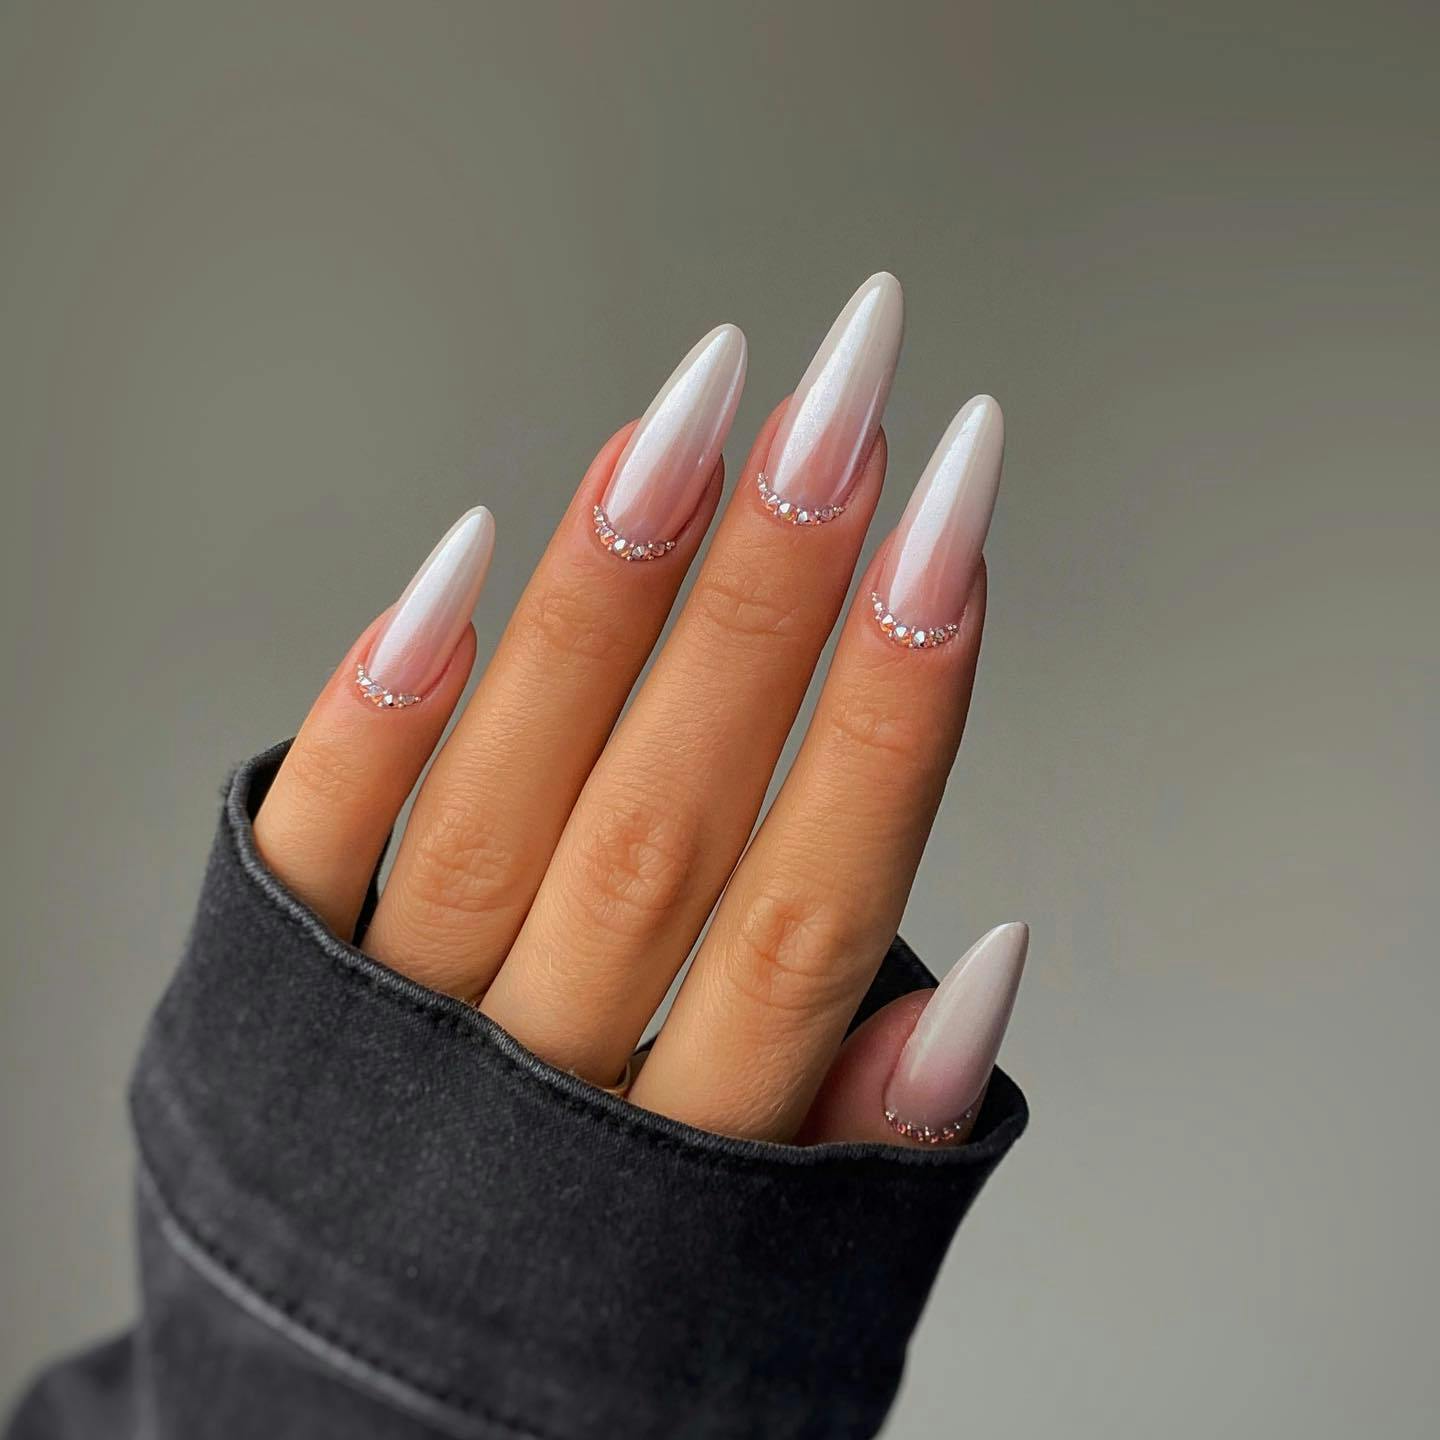 24 Trending Milky White Nails in 2023 That are So Smooth - Zohna